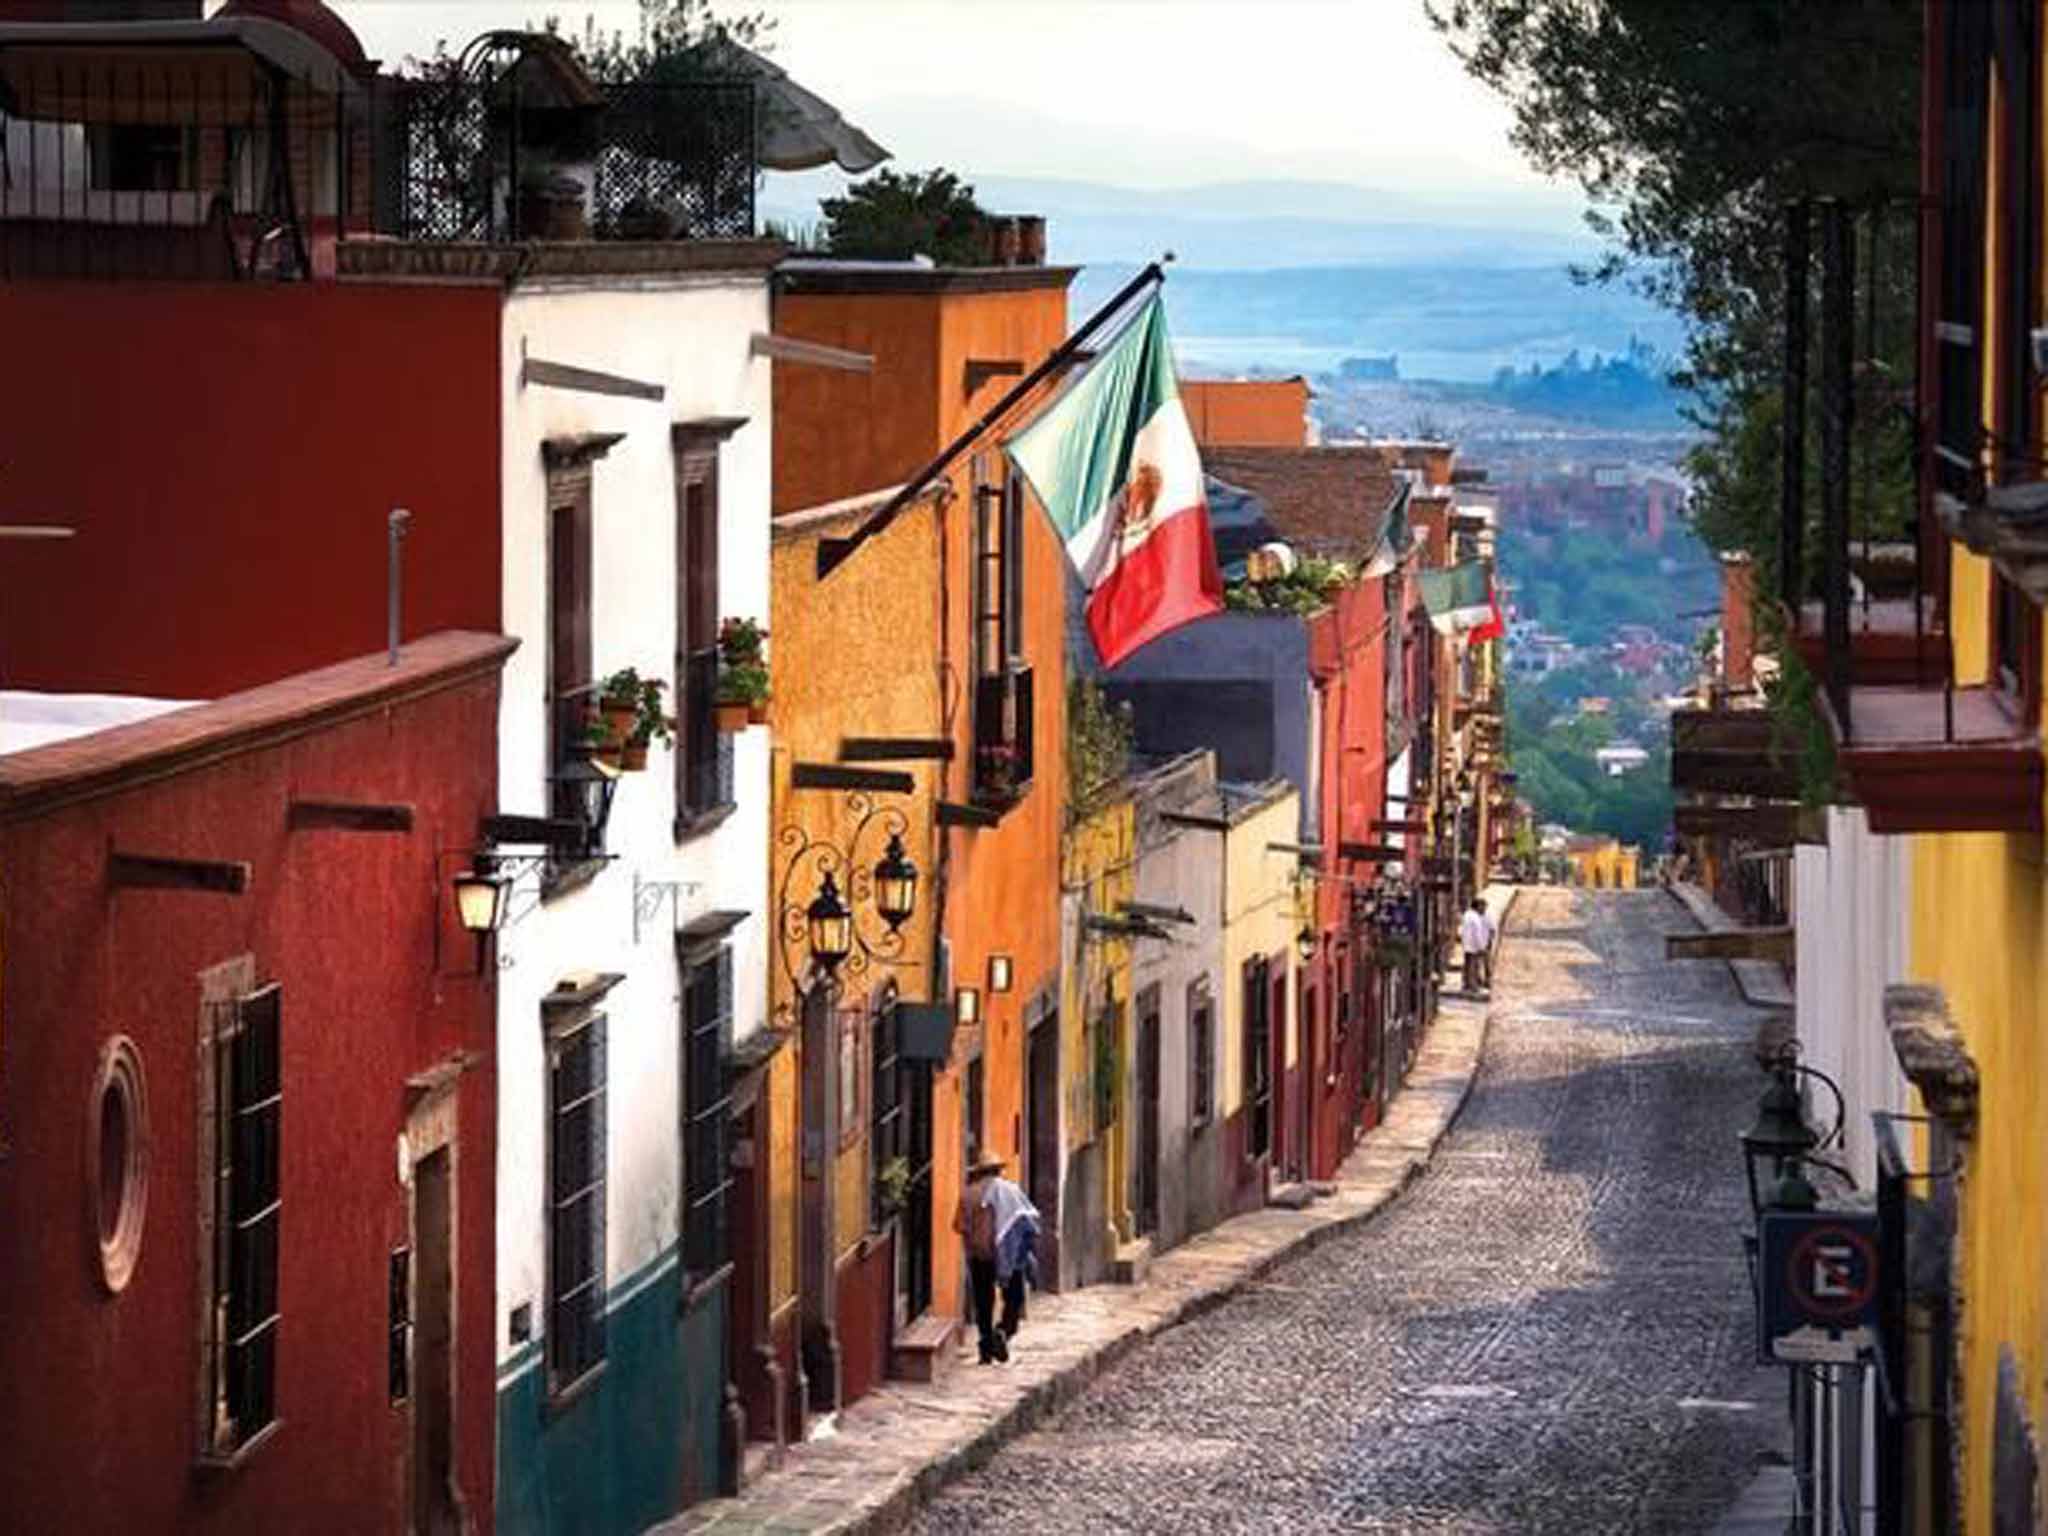 Cobbled together: San Miguel's charming colonial streets